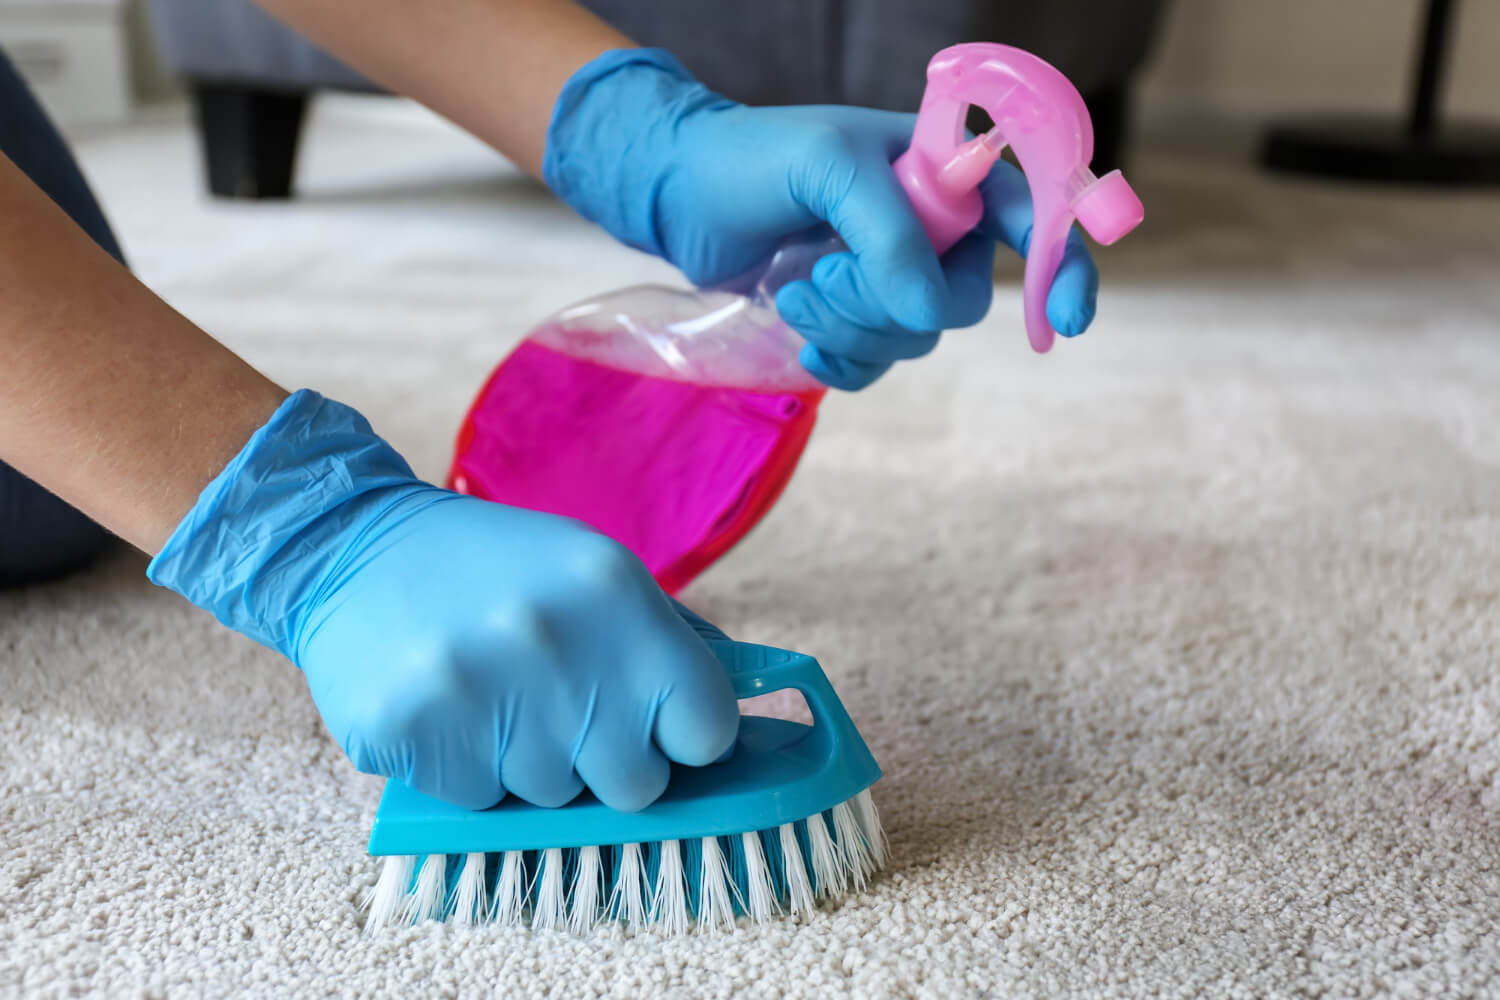 close up female hands in protective blue gloves cleaning carpet with pink cleaning spray and cleaning brush